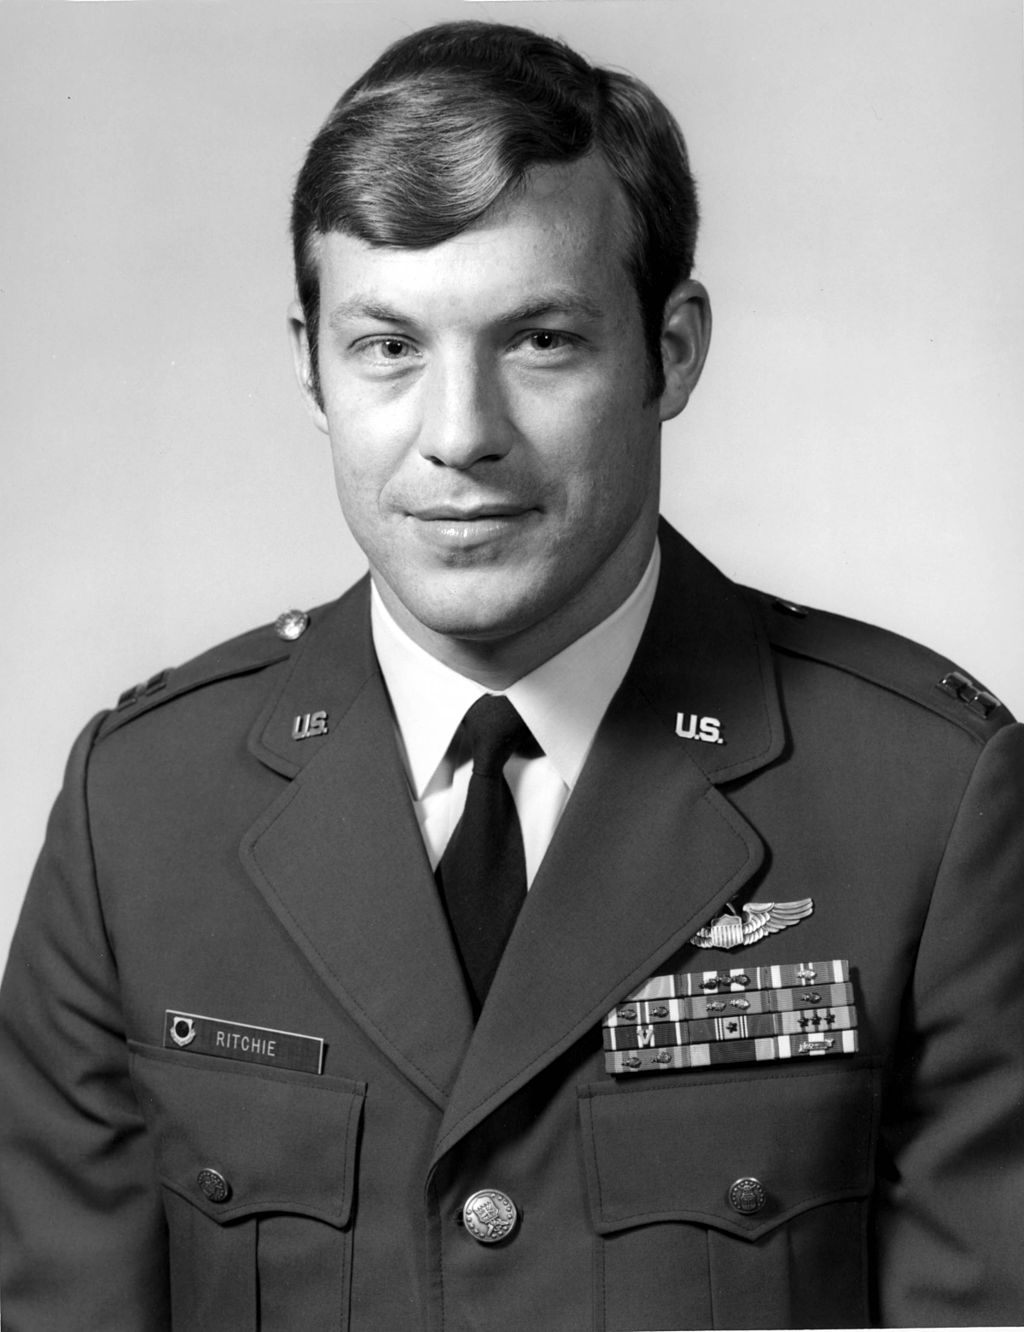 Captain Richard Stephen Ritchie, United States Air Force